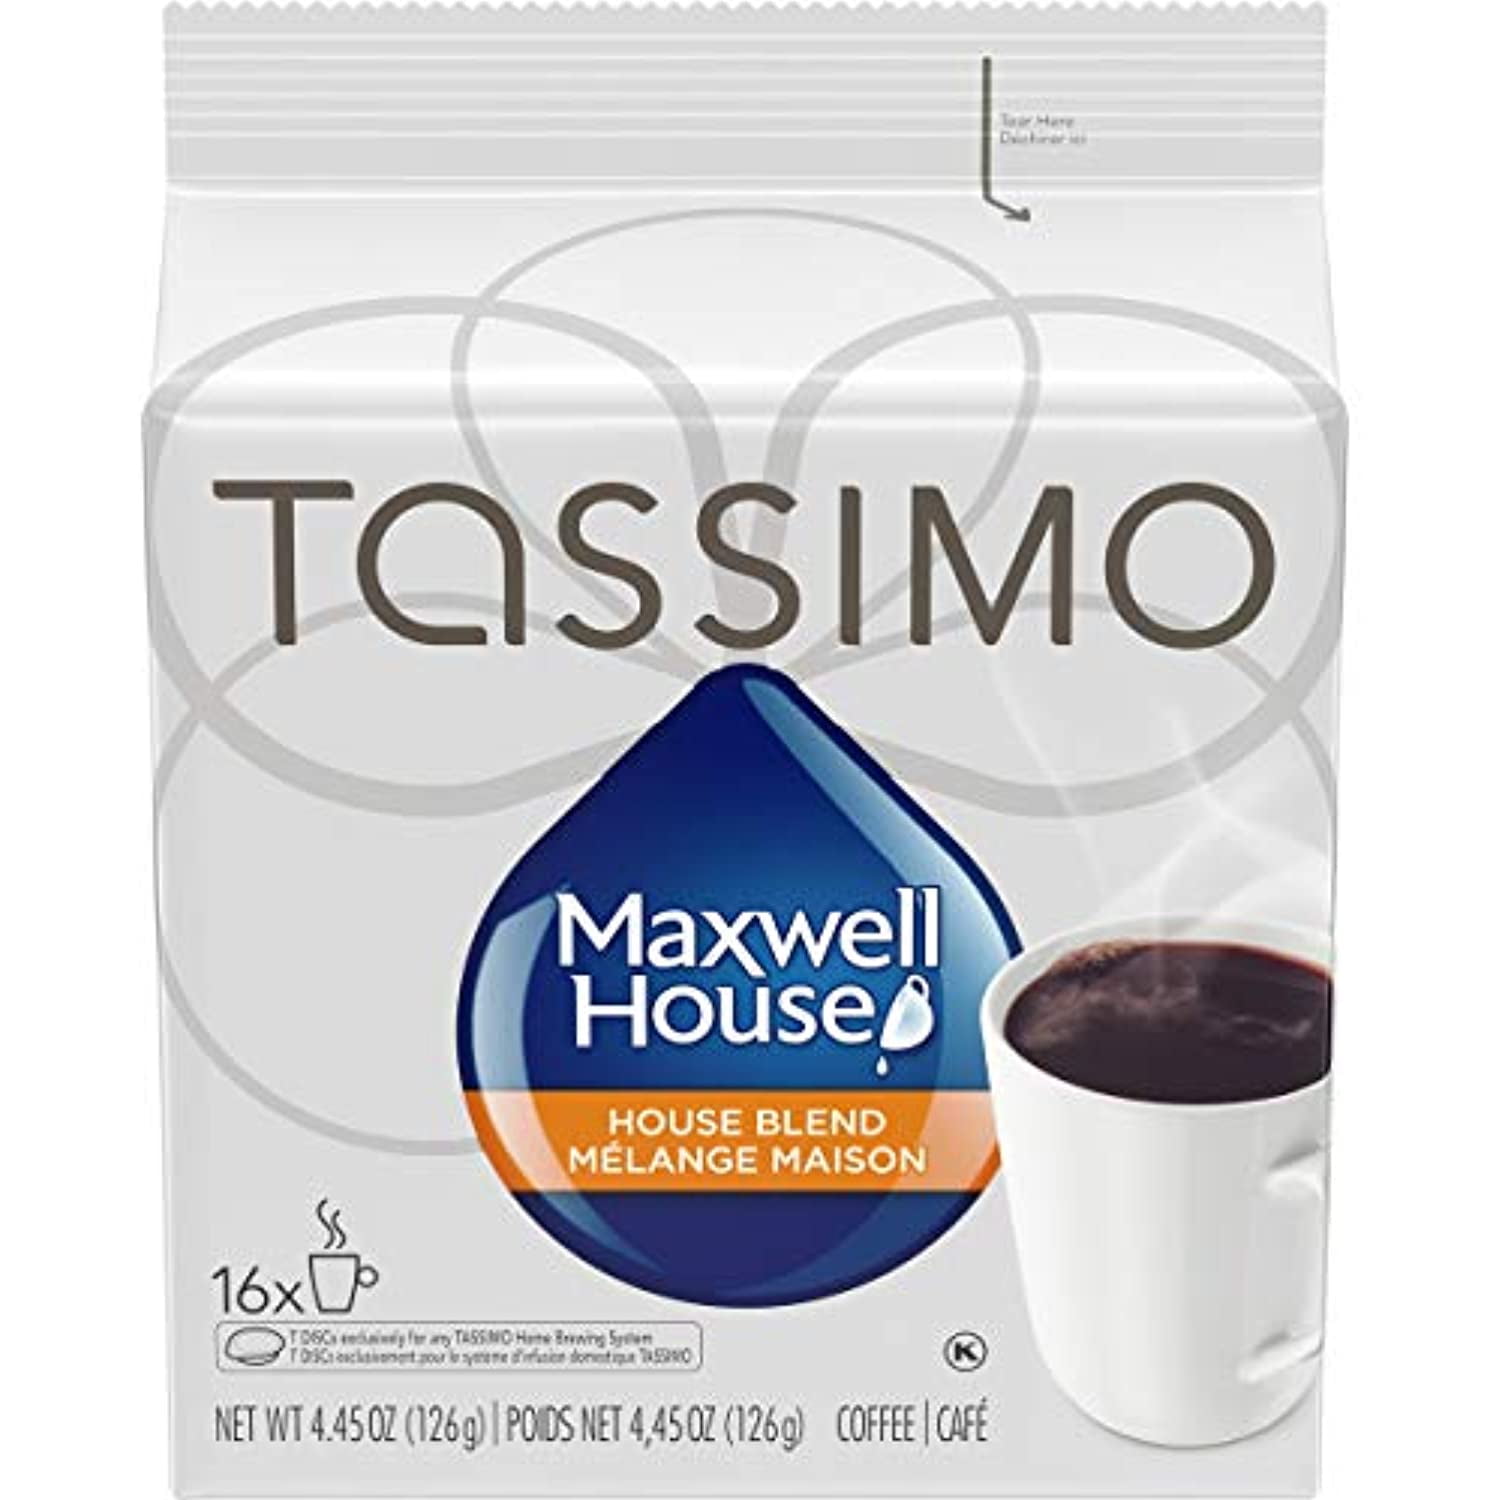 EVER RICH SNUGGLE Tassimo T-Disc Capsule Pod Holder Stores up to 56 Bosch Tassimo T-Discs Coffee Capsules BLK-TAS56 